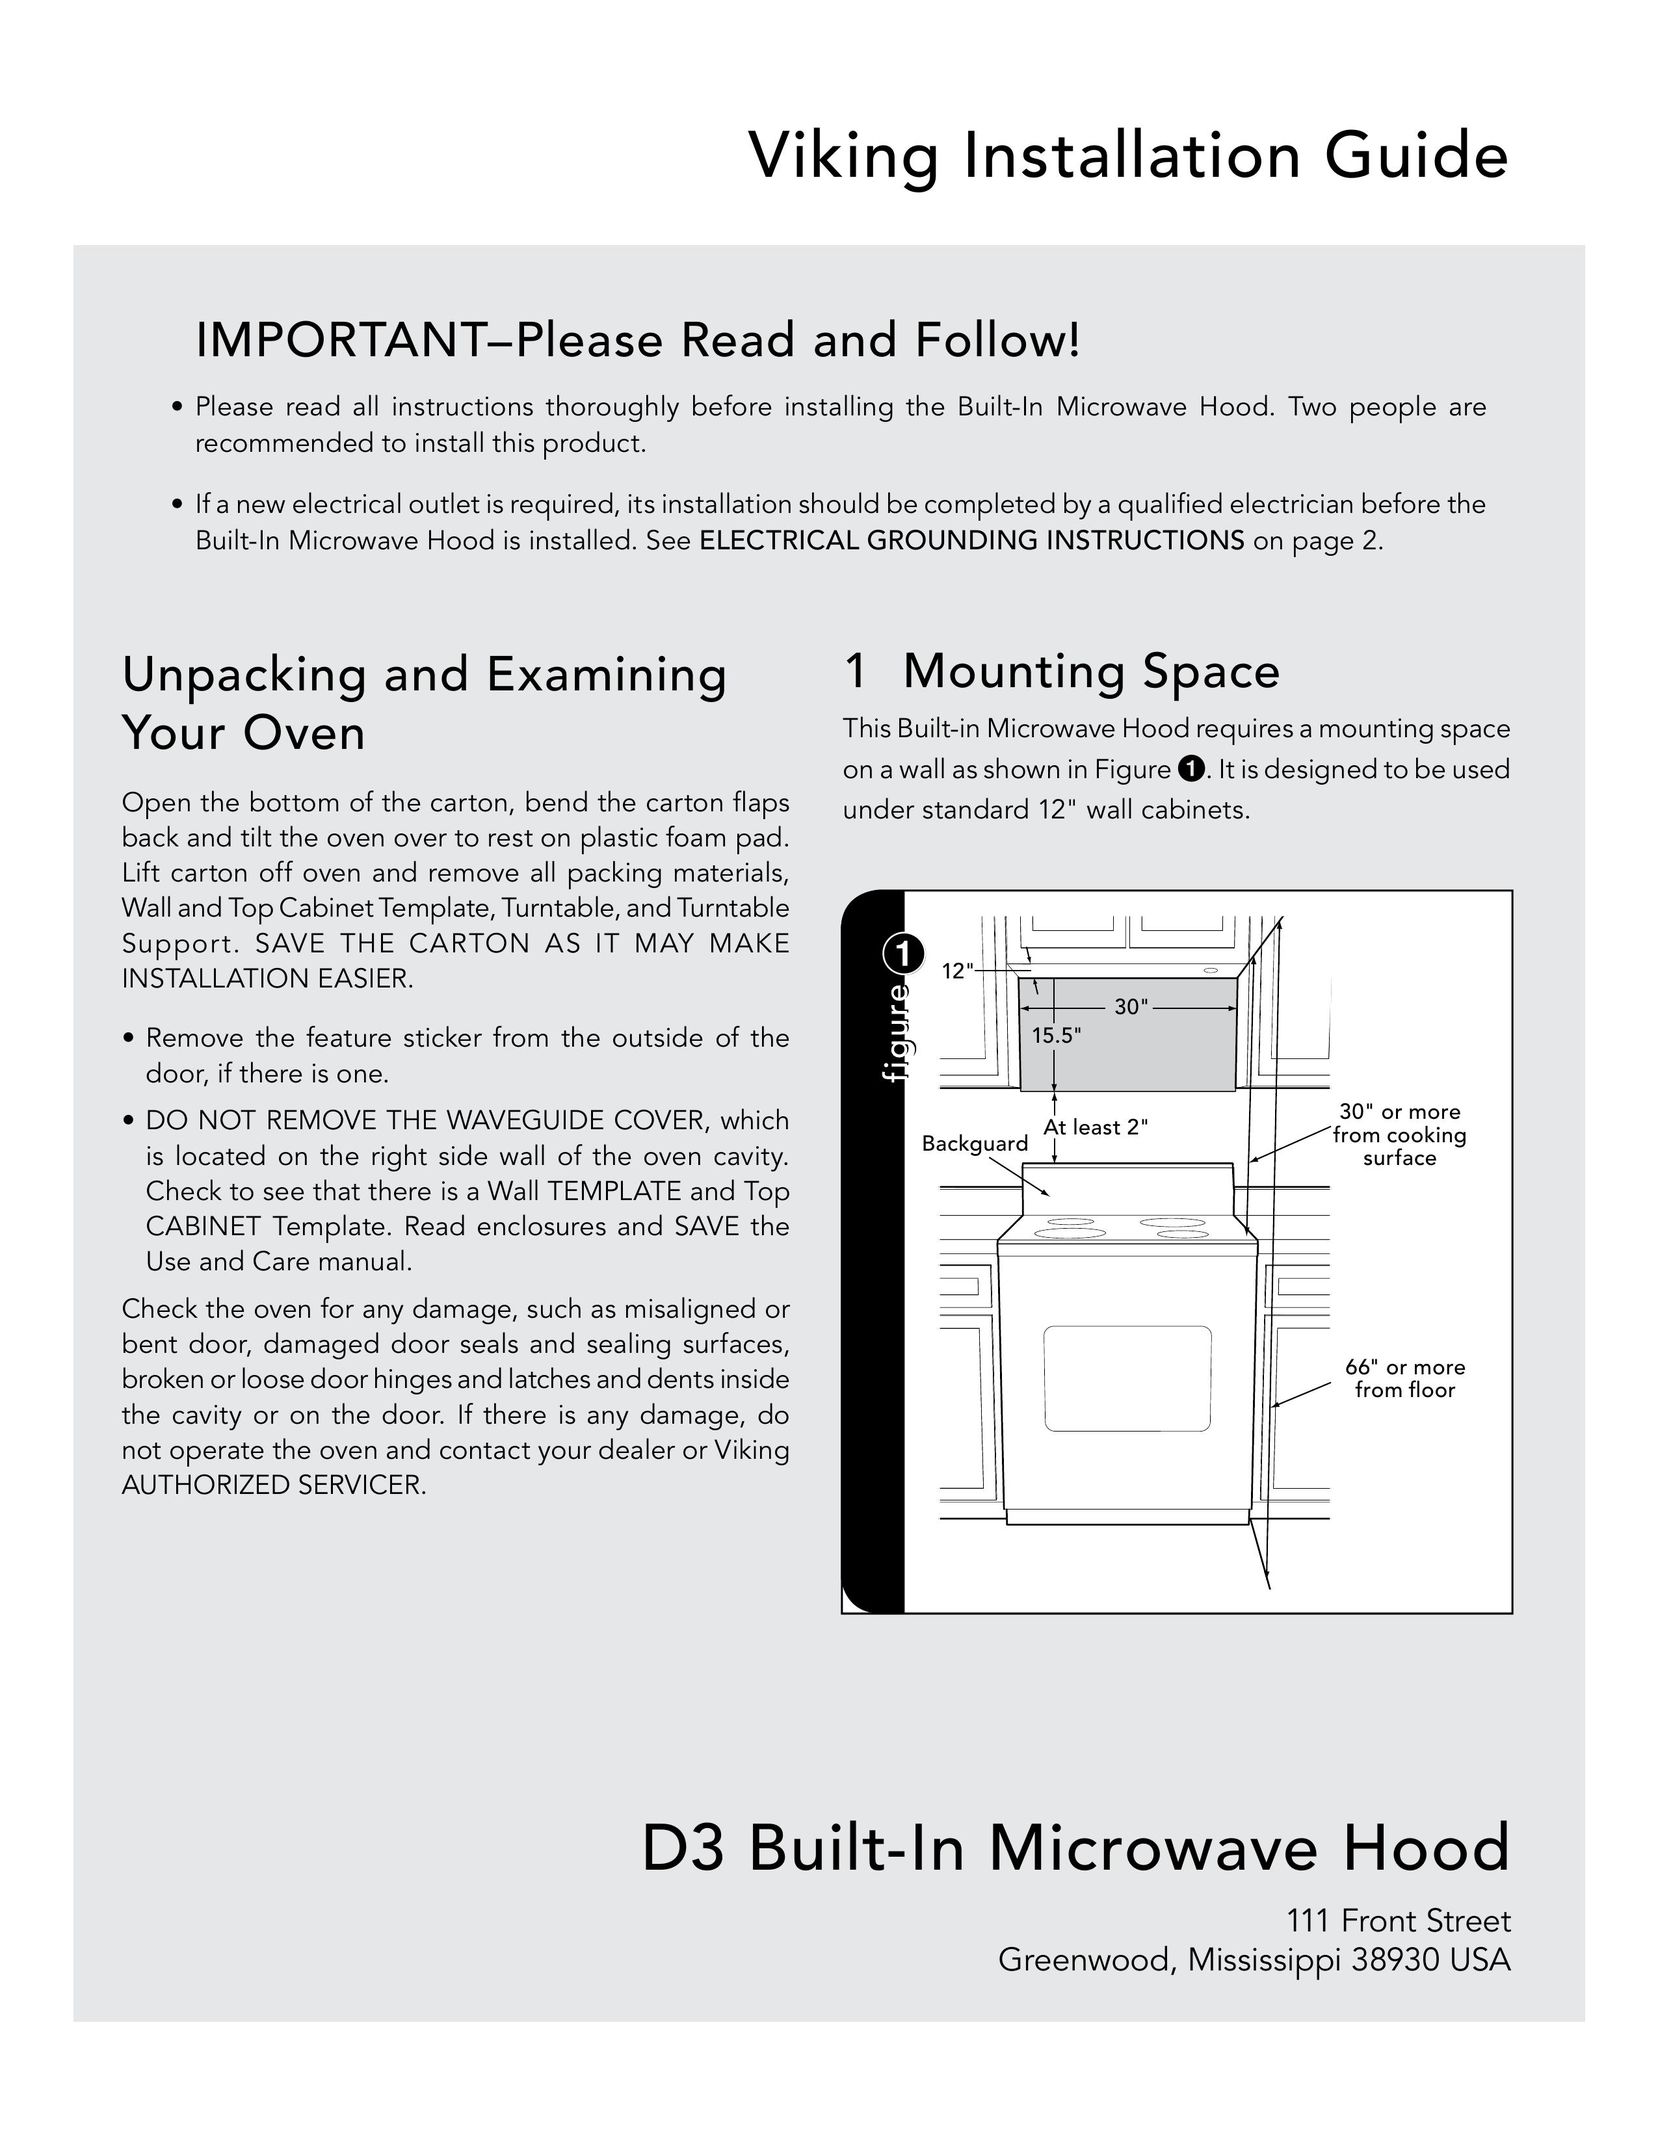 Viking D3 Convection Oven User Manual